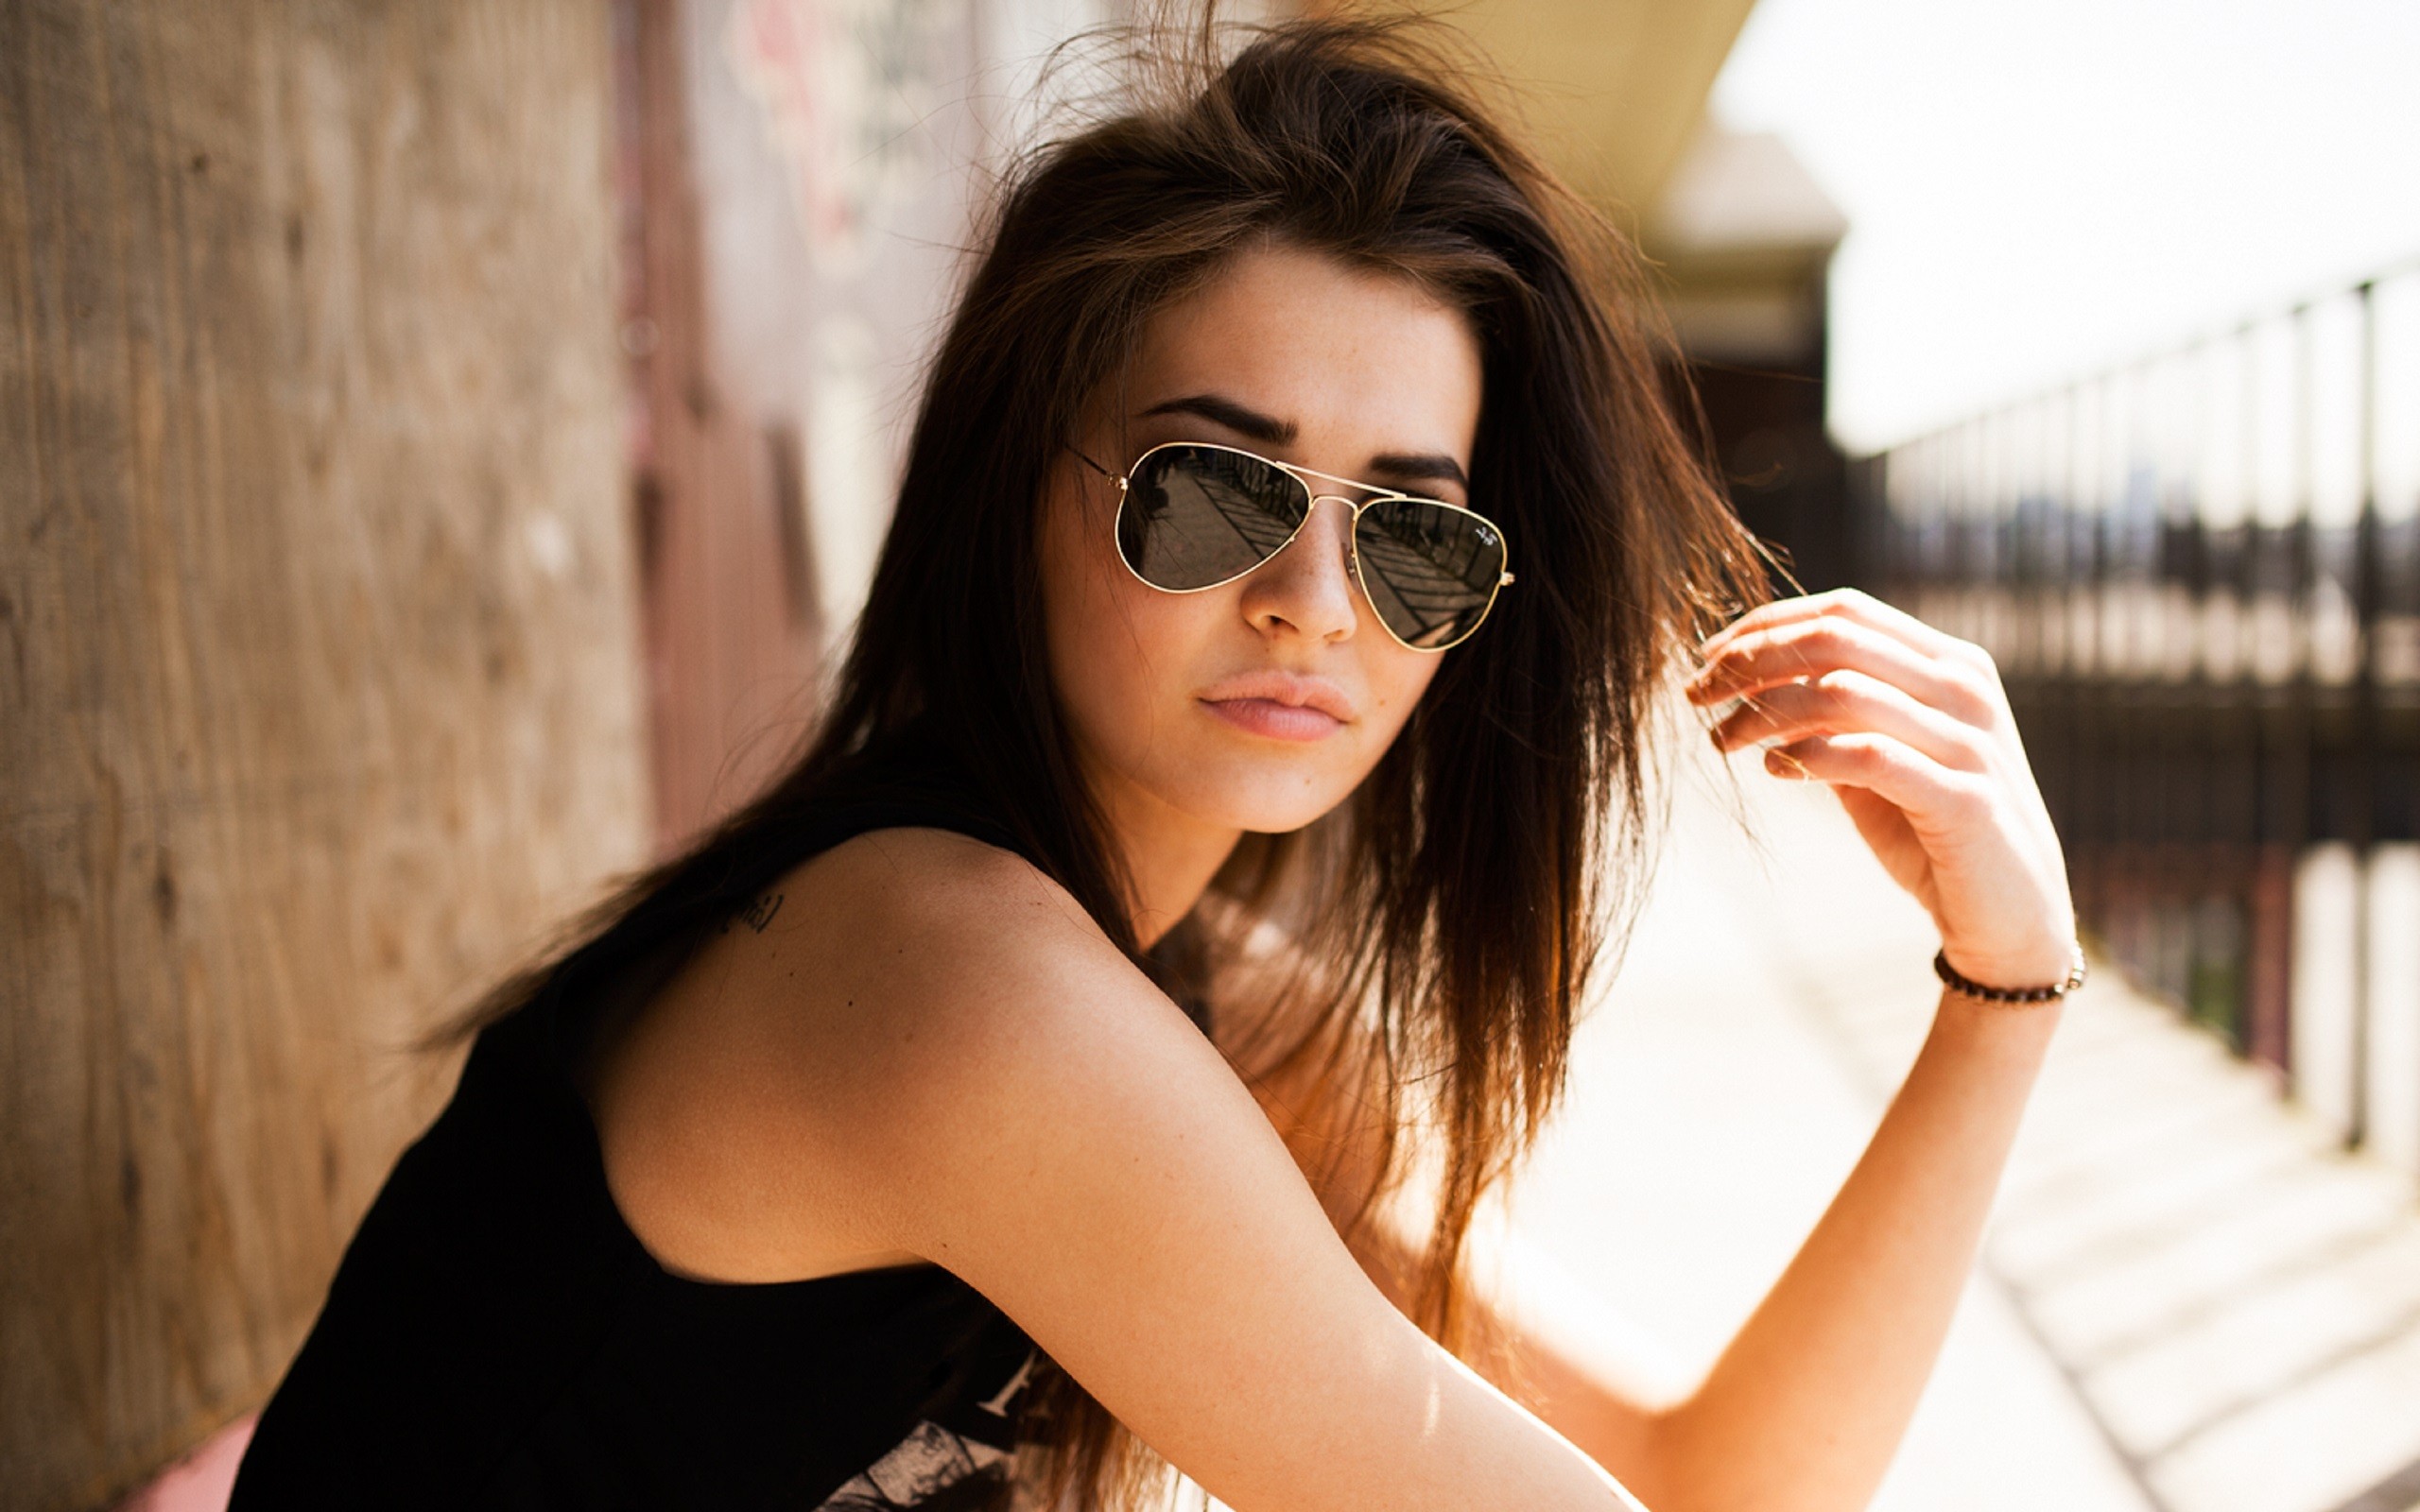 Woman with sunglasses photo